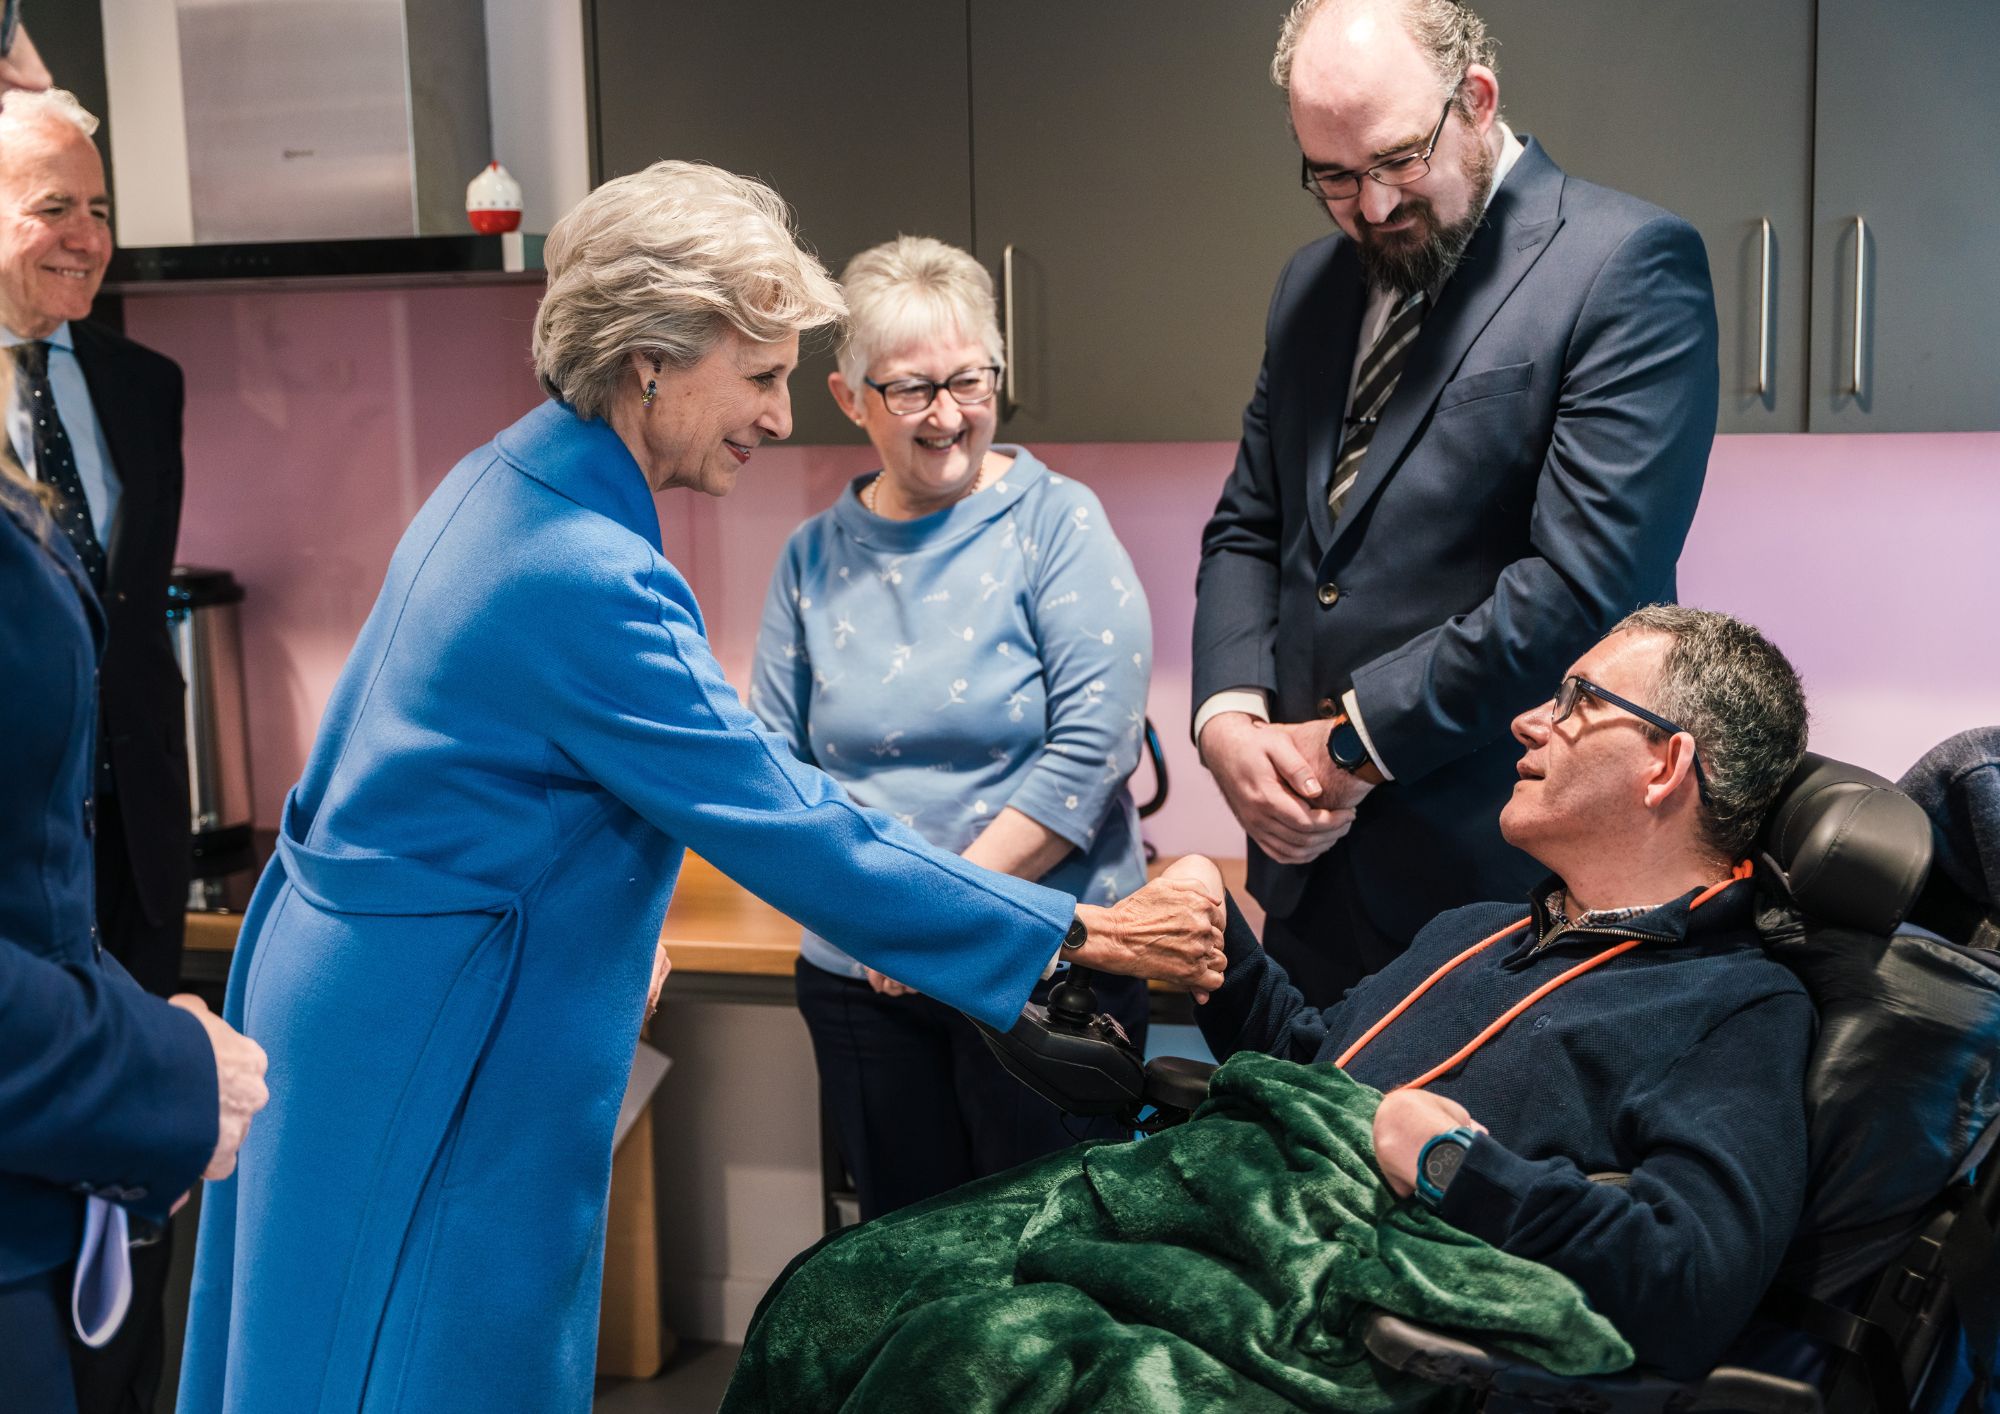 A lady in a blue coat shaking hands with a man in a wheelchair